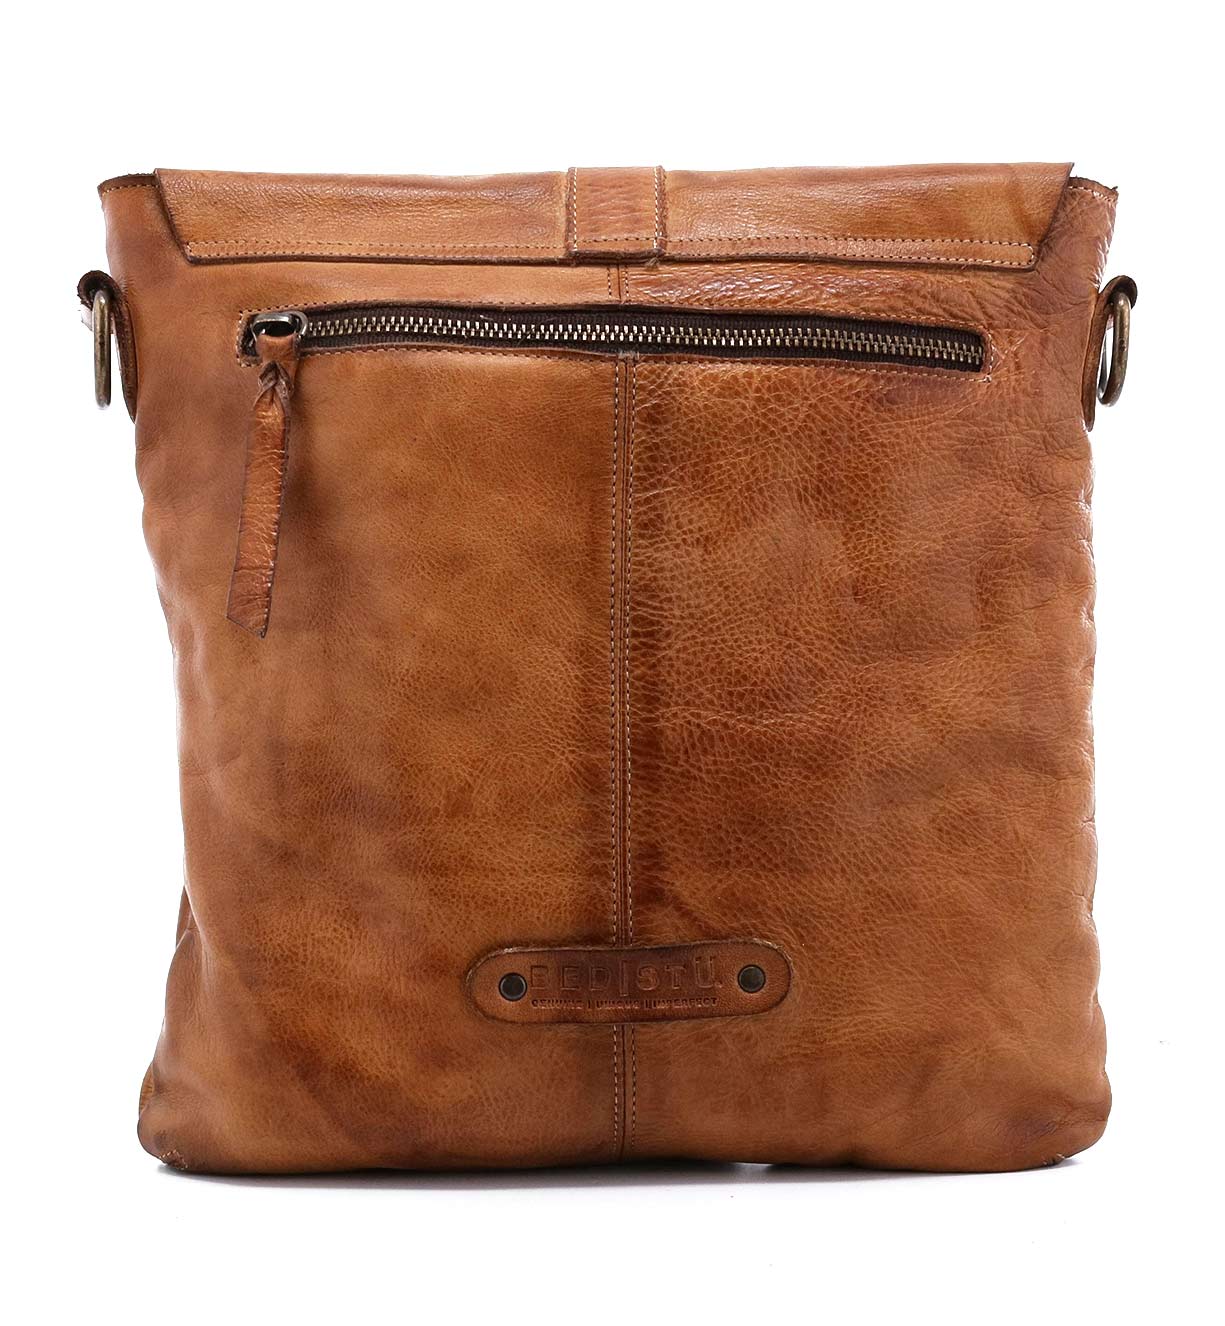 A Jack by Bed Stu brown leather crossbody bag with a zipper.